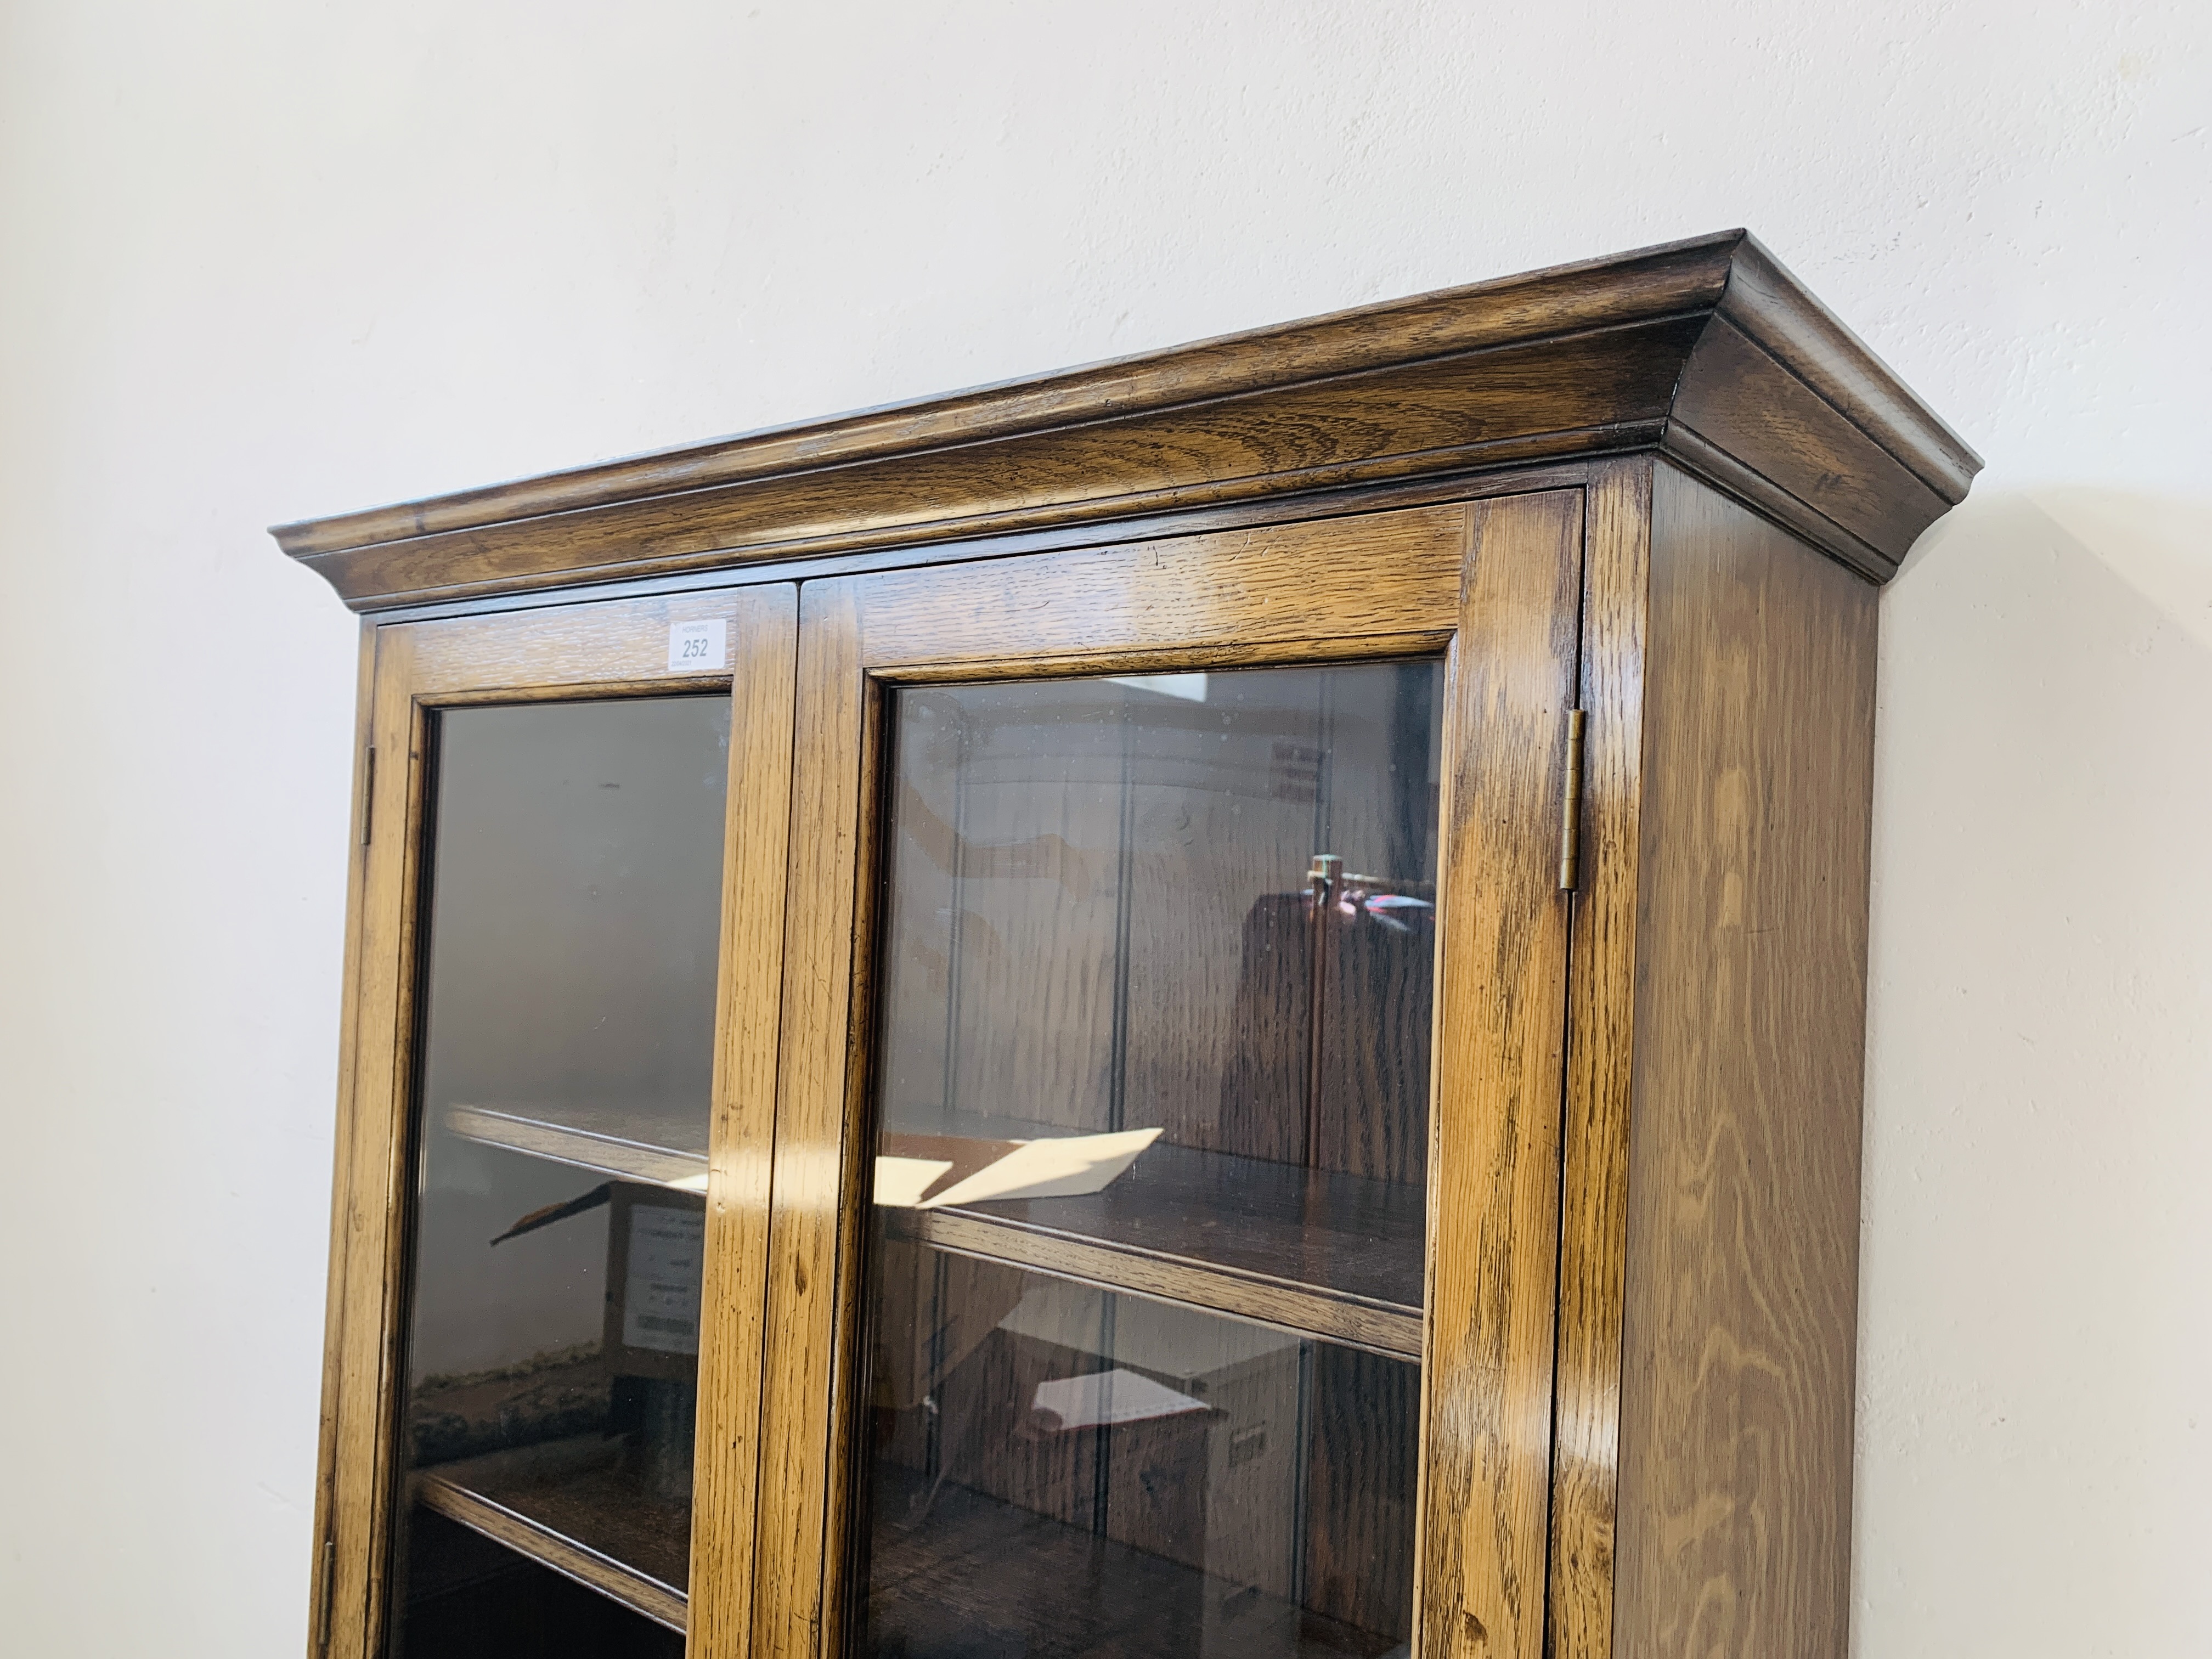 A QUALITY REPRODUCTION OAK BOOKCASE WITH CUPBOARD BASE BY DAVID NOTTAGE CABINET MAKER - W 75cm. - Image 7 of 14